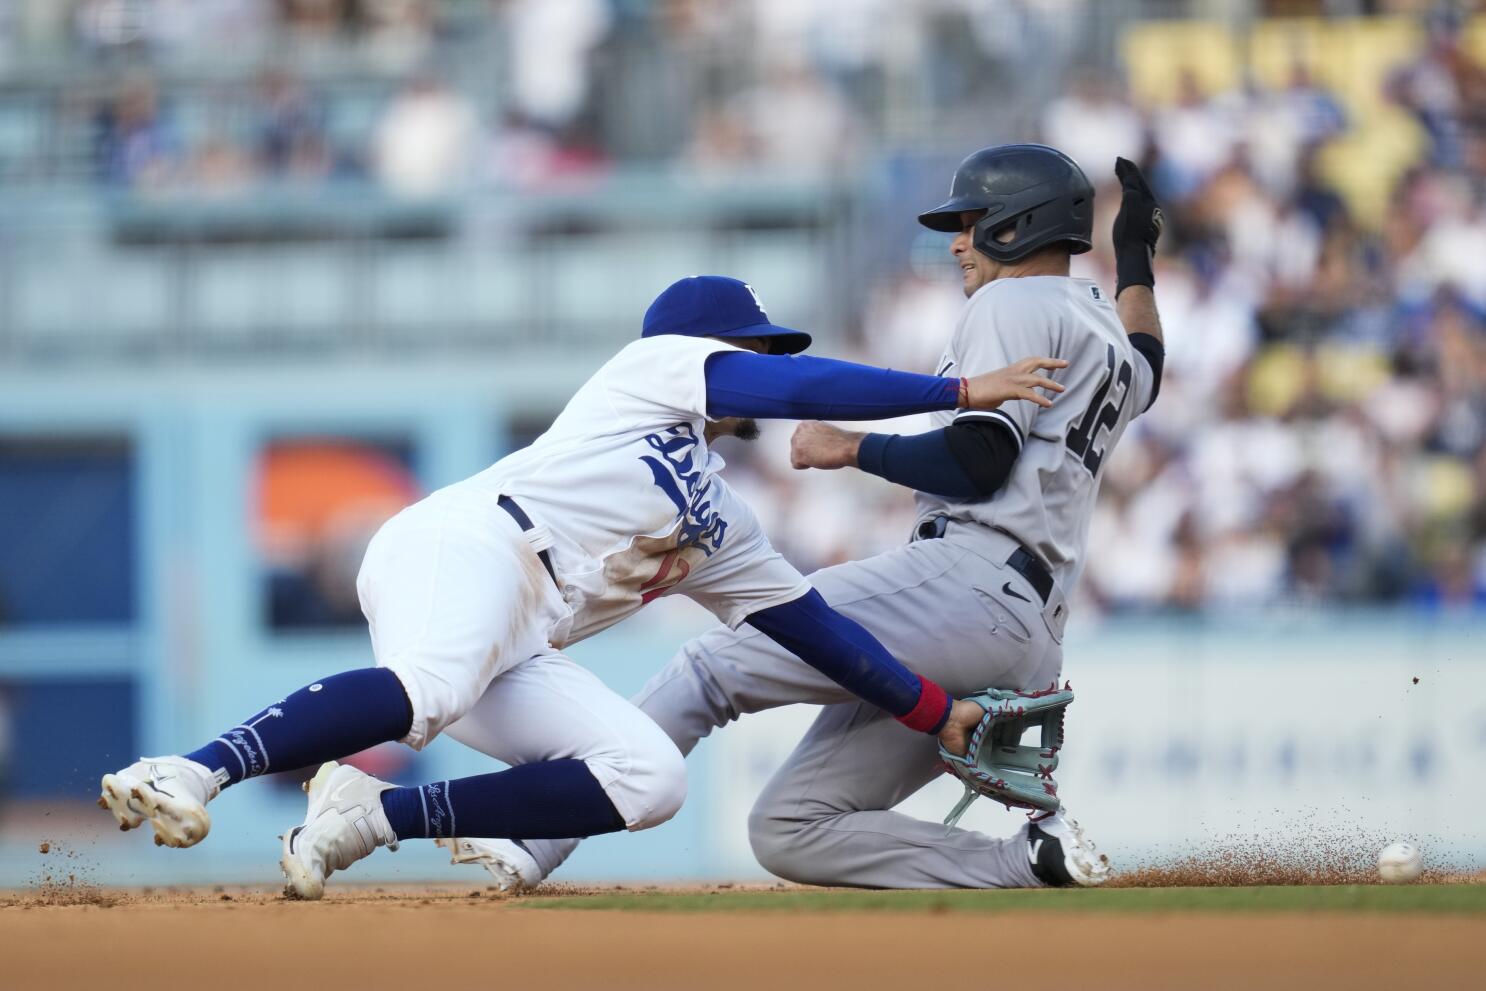 Imagine this Yankees-Dodgers battle taking place in October